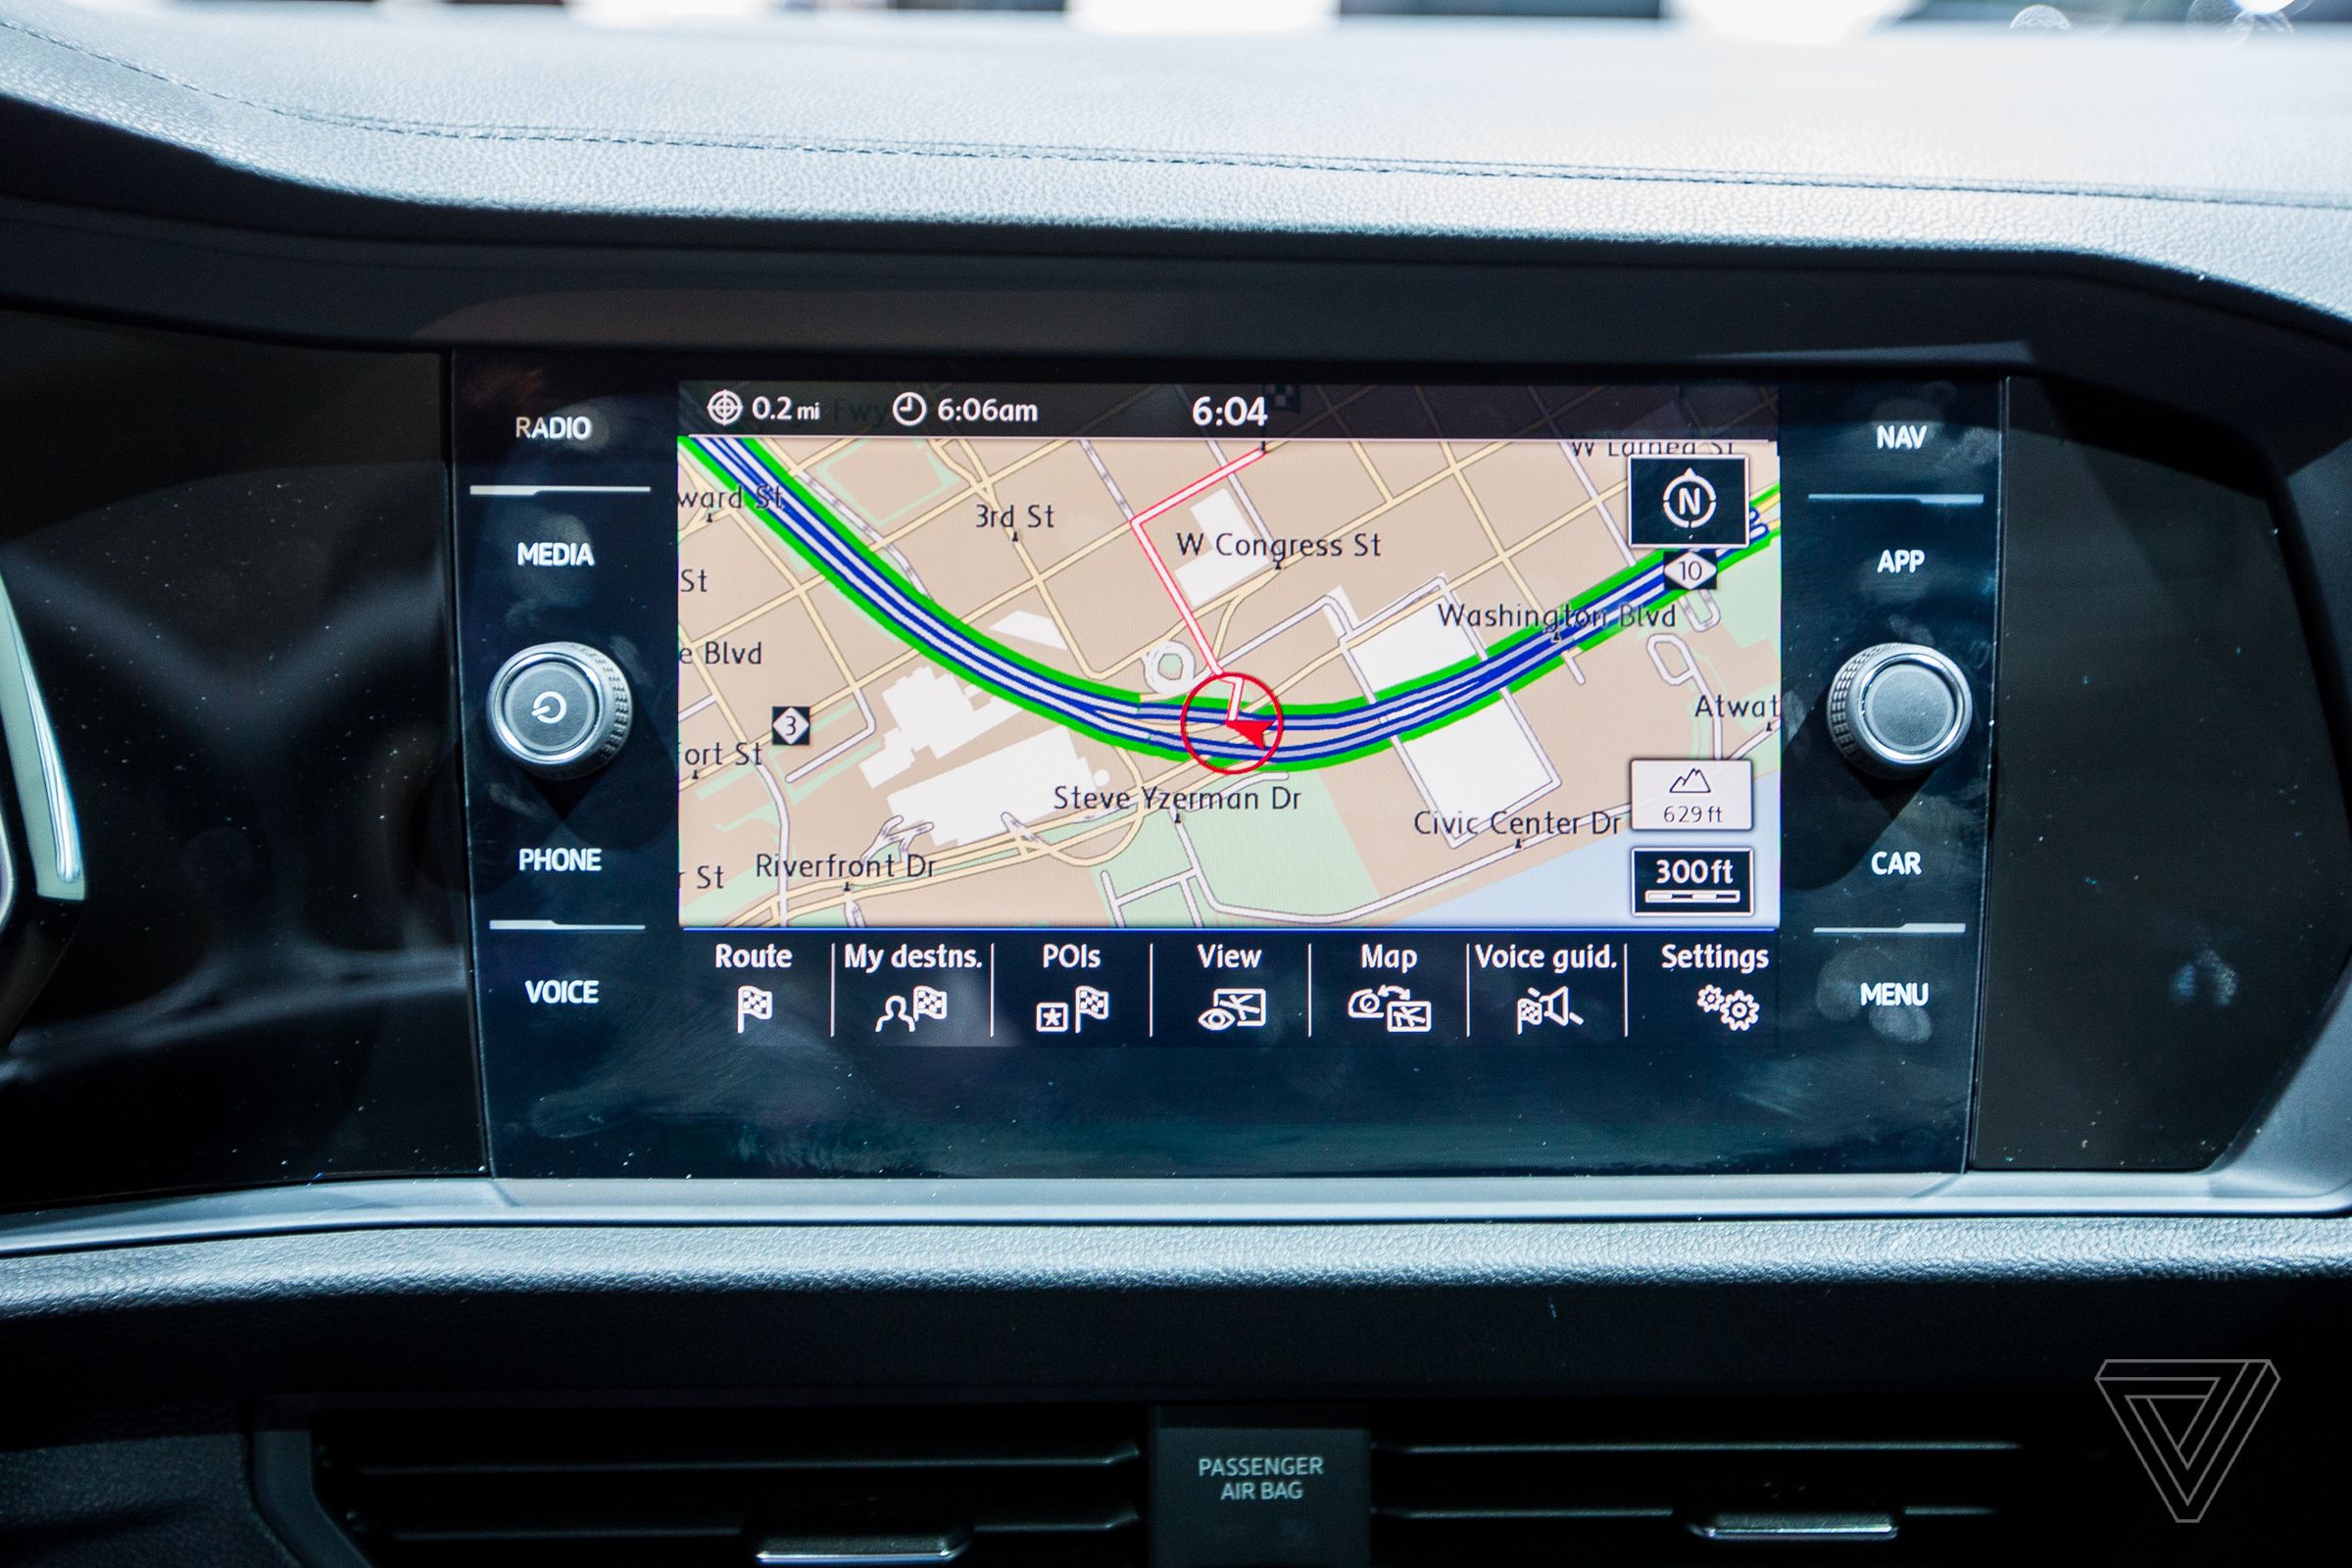 The new Jetta’s touchscreen interface.